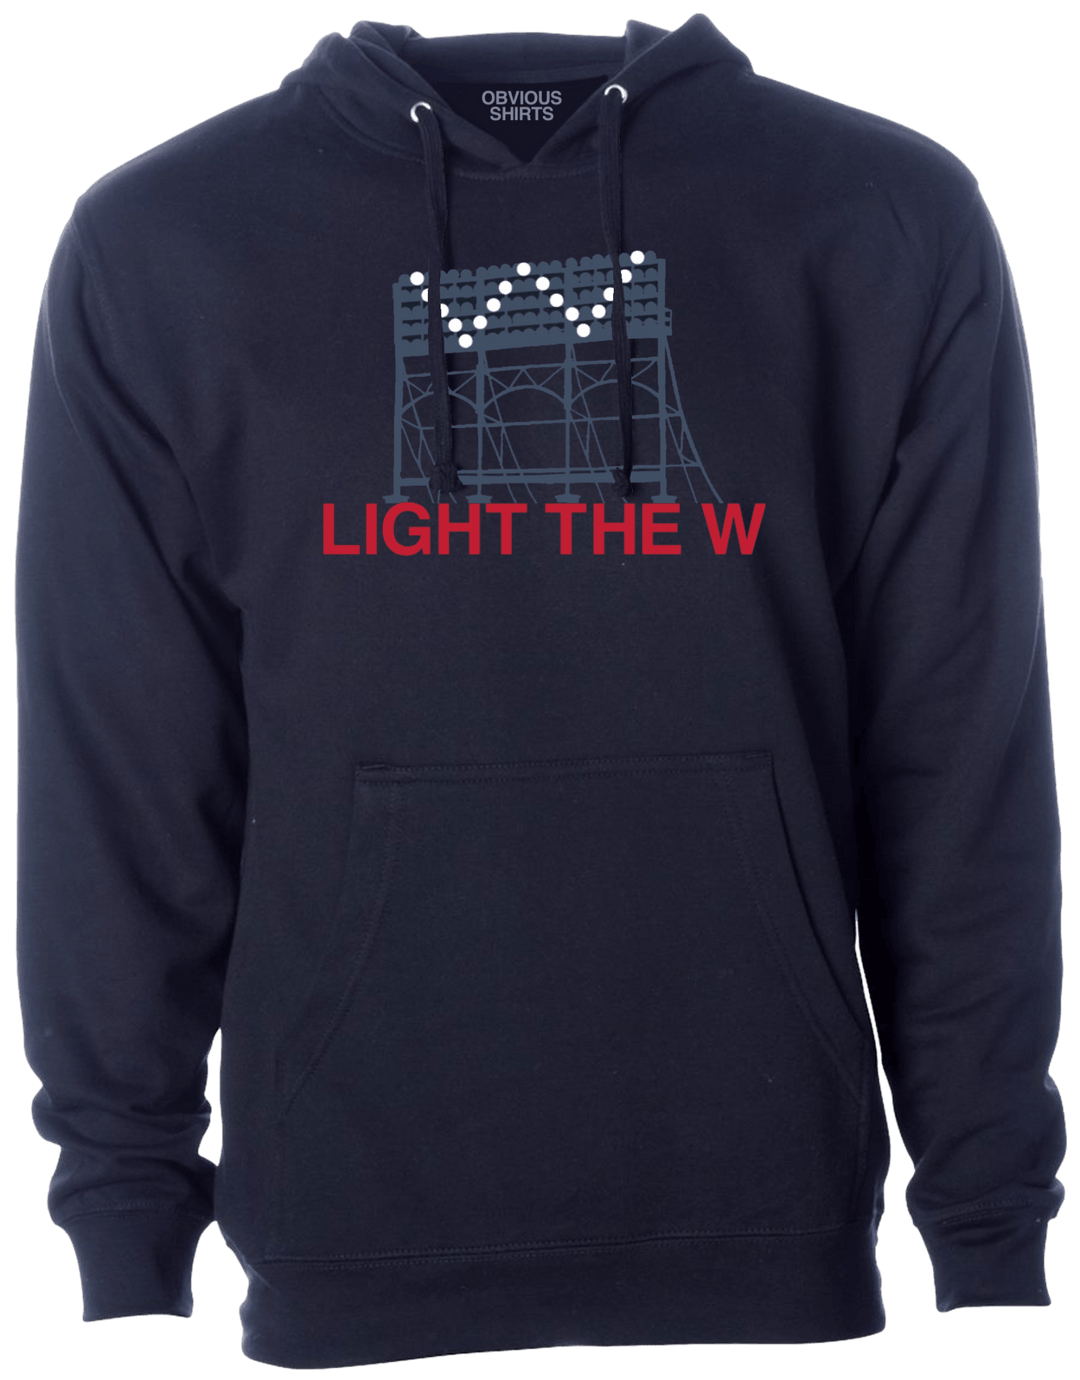 LIGHT THE W. (HOODED SWEATSHIRT) - OBVIOUS SHIRTS